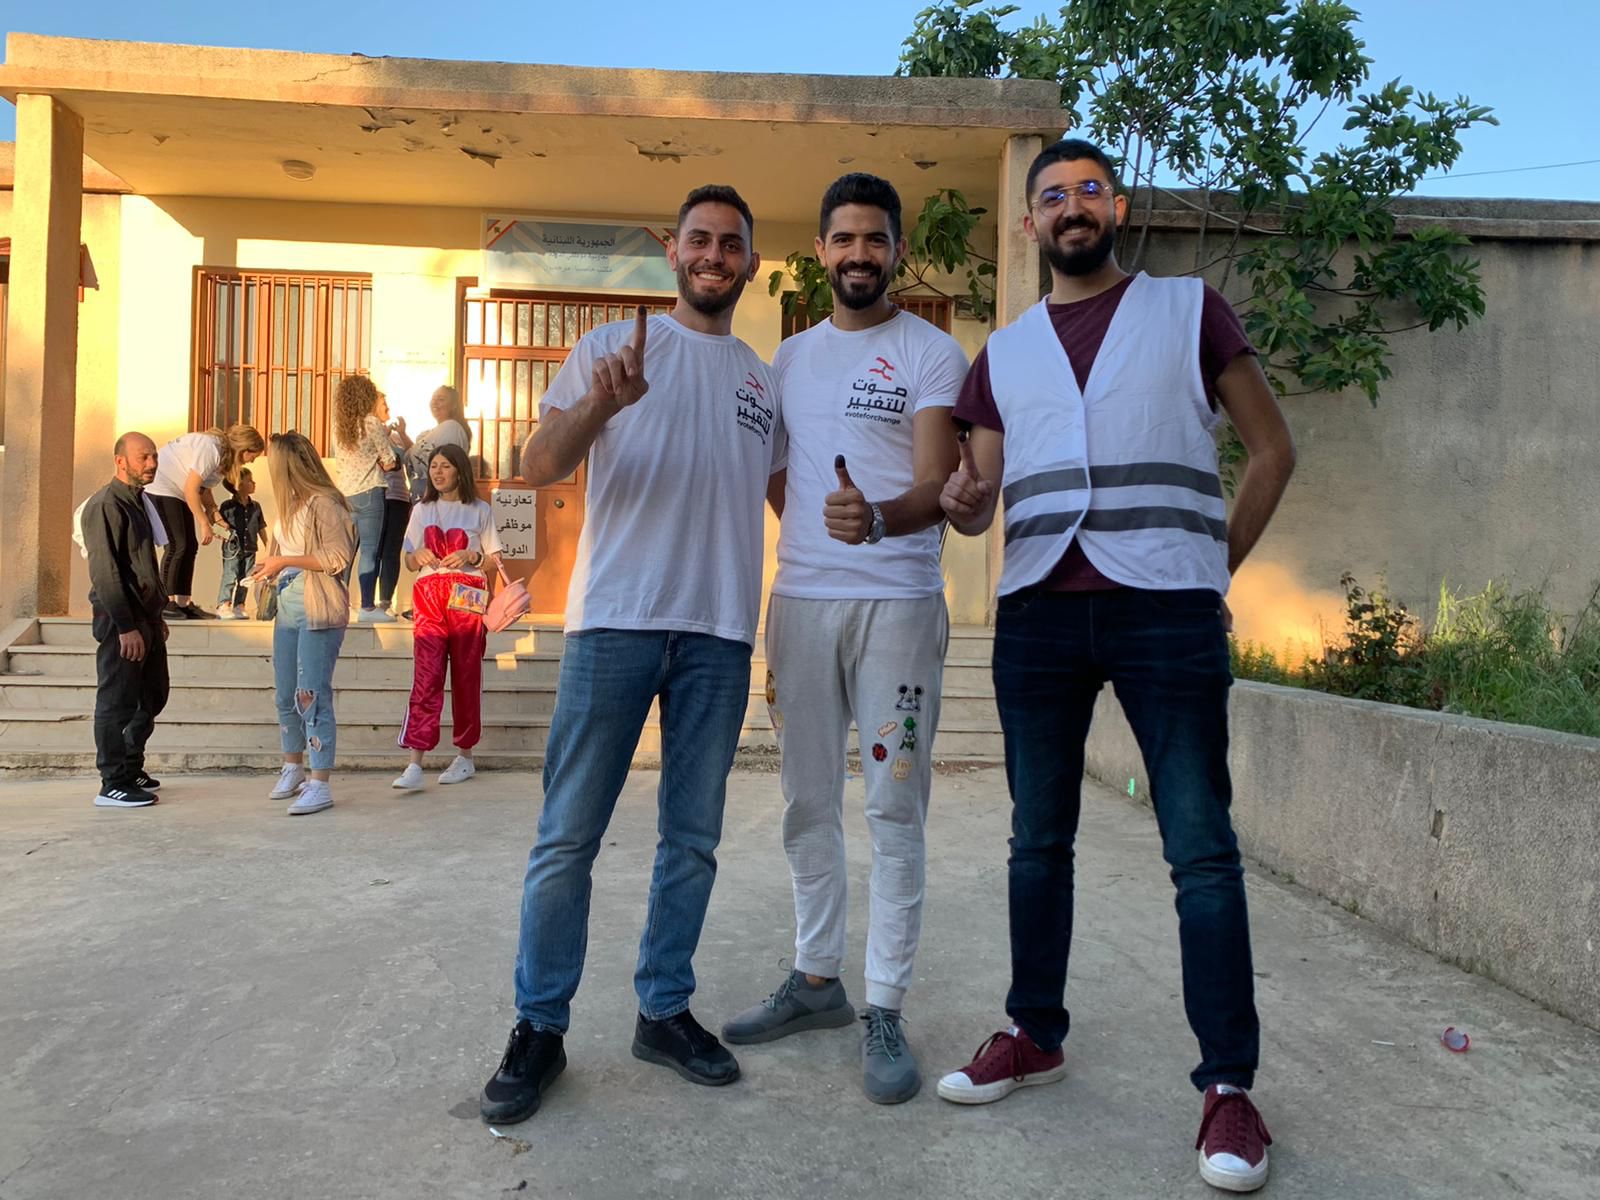 Elias Assi, Roy Bshara and Tareq Laqees in Marjayoun district (MEE/AJ Naddaff)